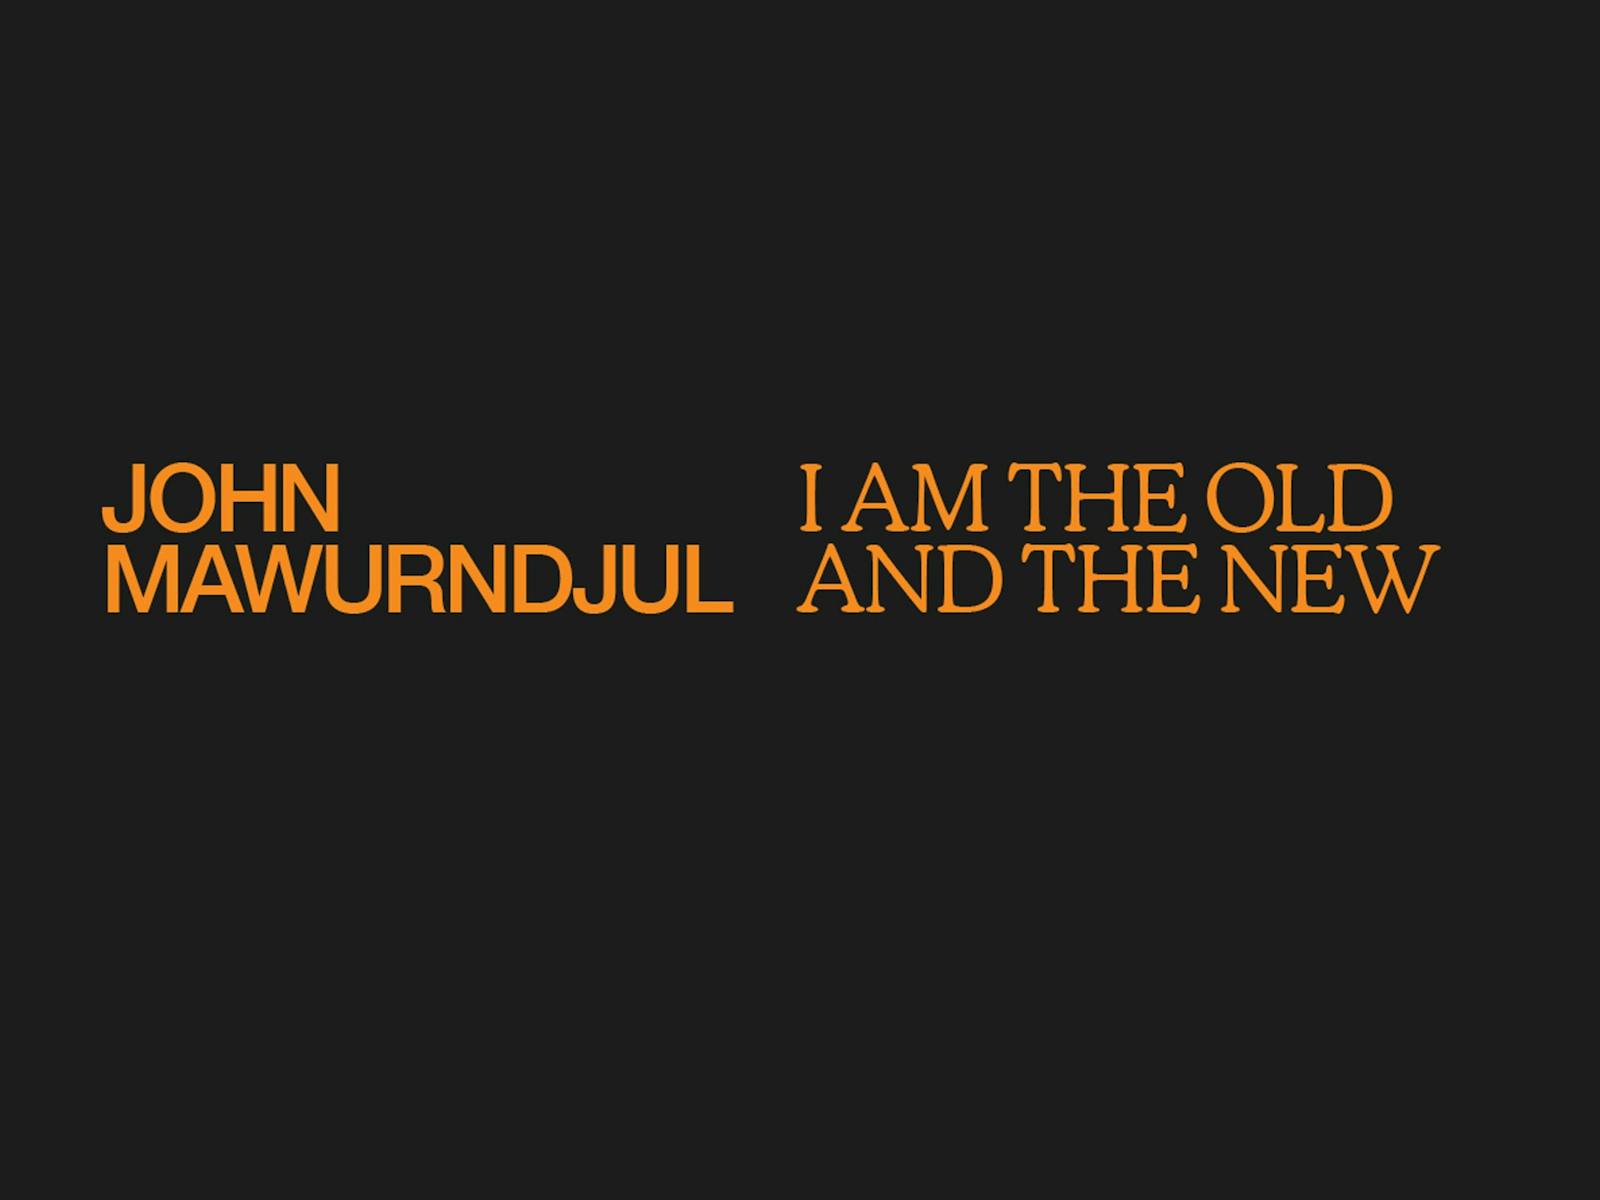 Image for Touring John Mawurndjul: I am the old and the new